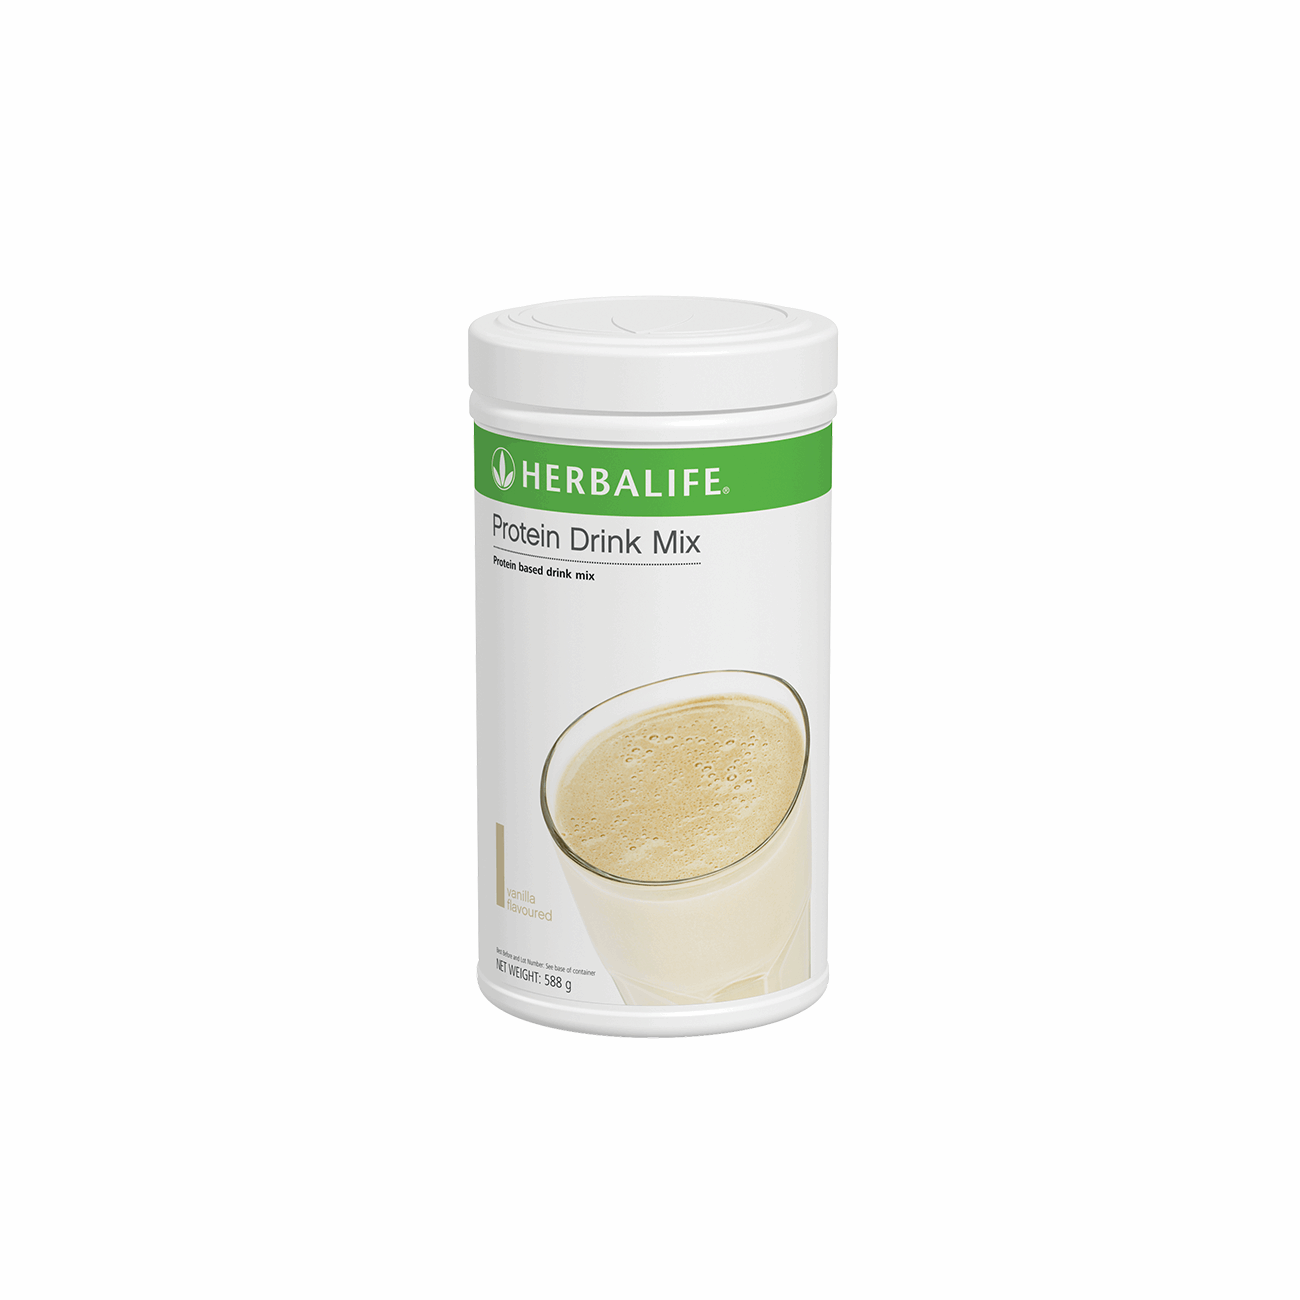 Herbalife Protein Drink Mix Canister